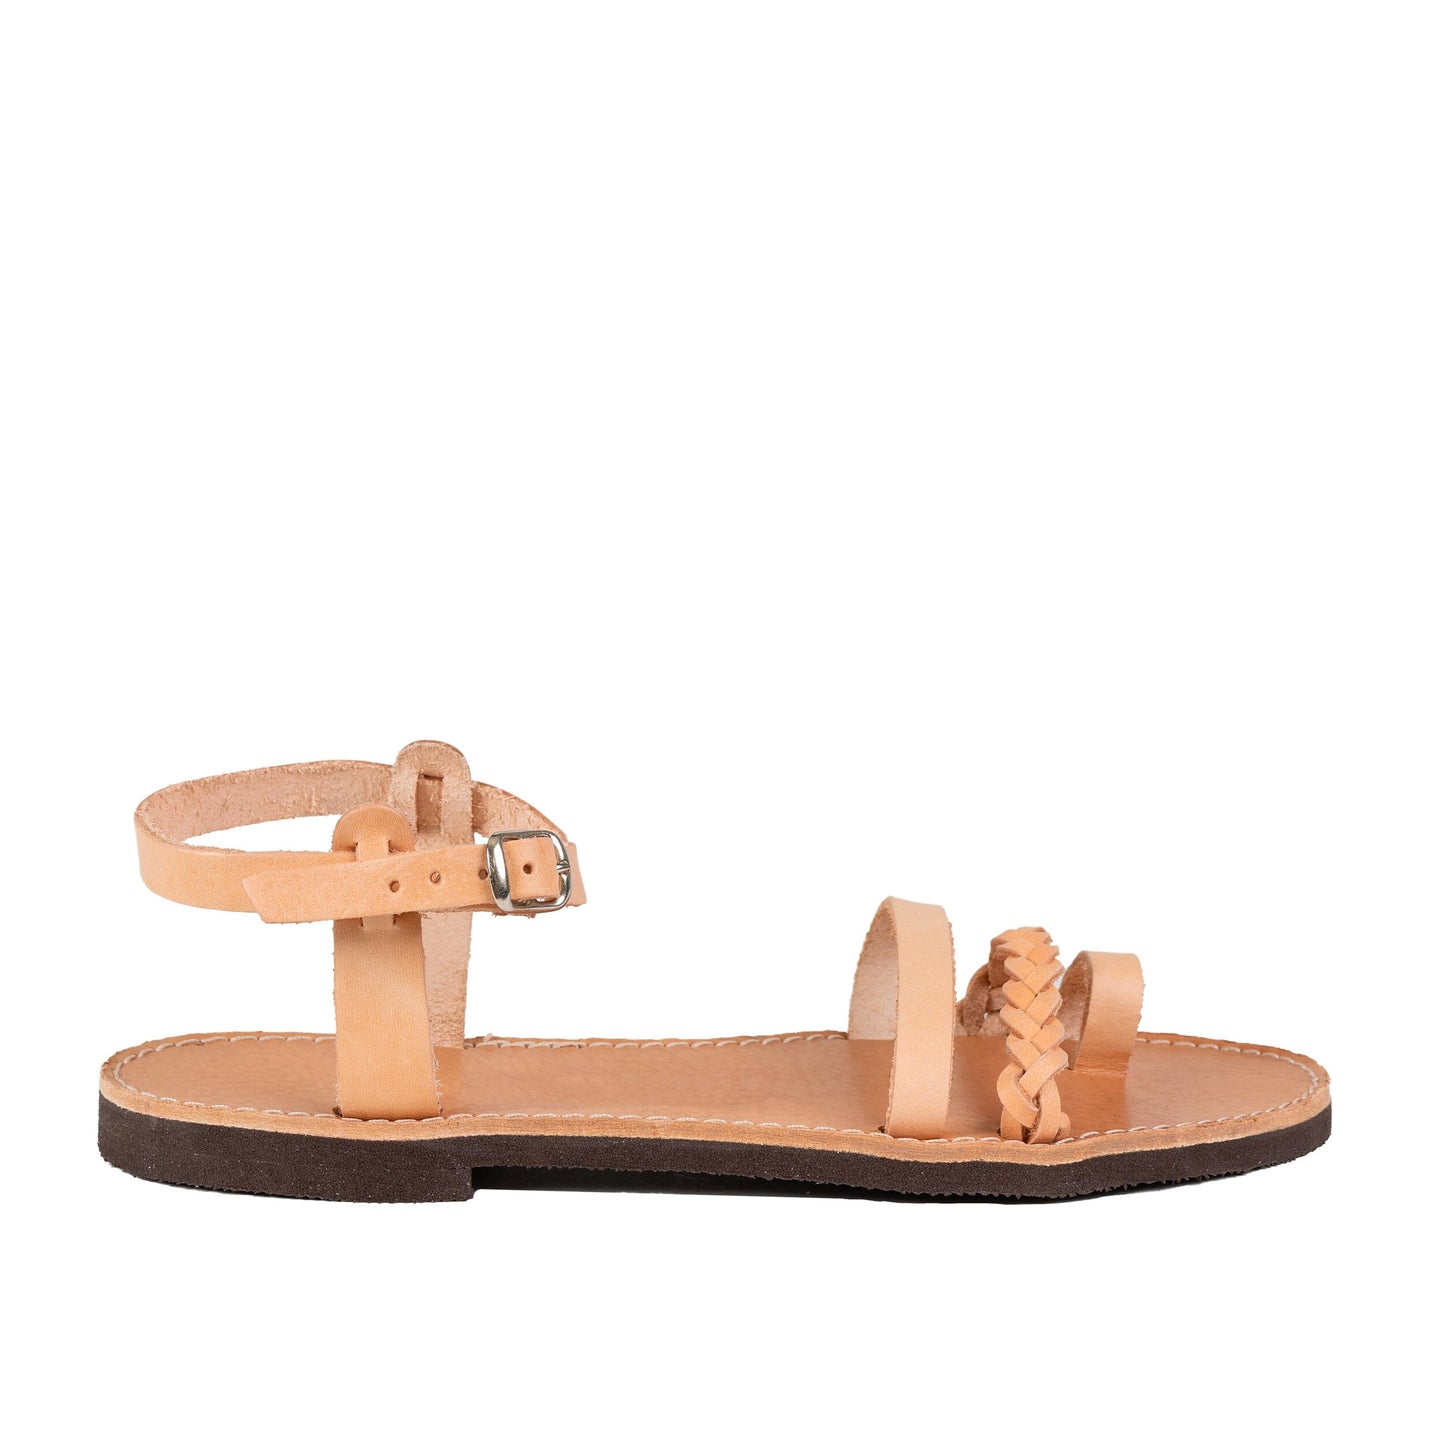 Strappy toe ring leather sandals, Bohemian flat sandals, Greek leather sandals women, Sandales cuir femme